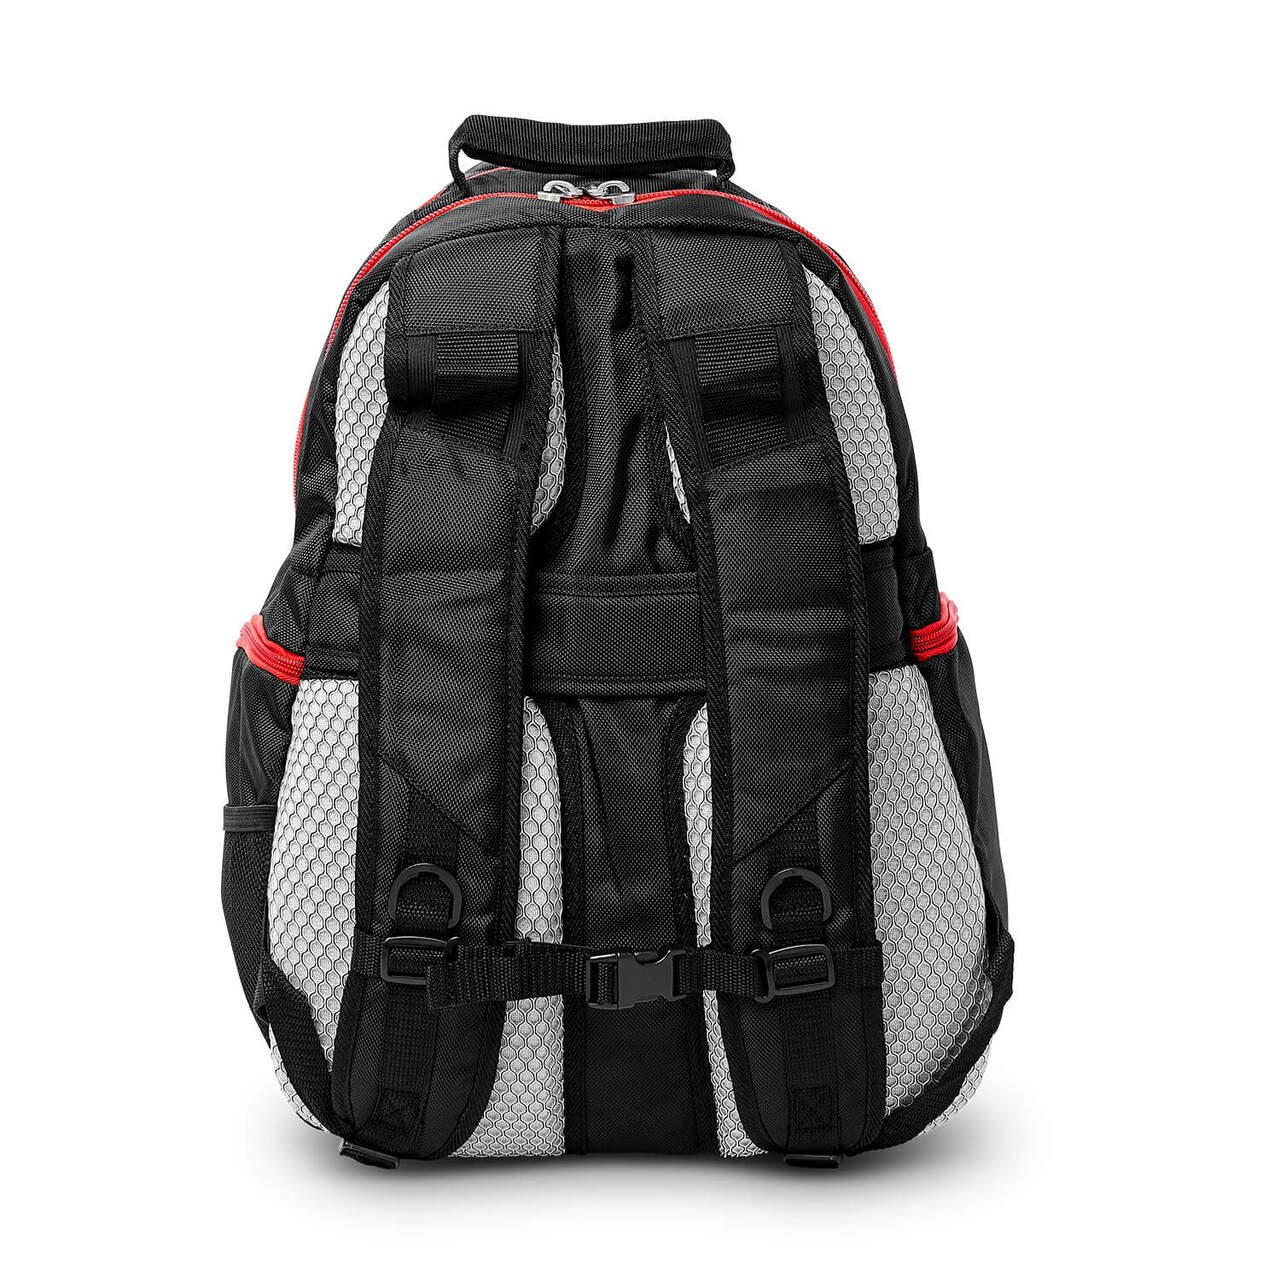 Red Laptop Backpack